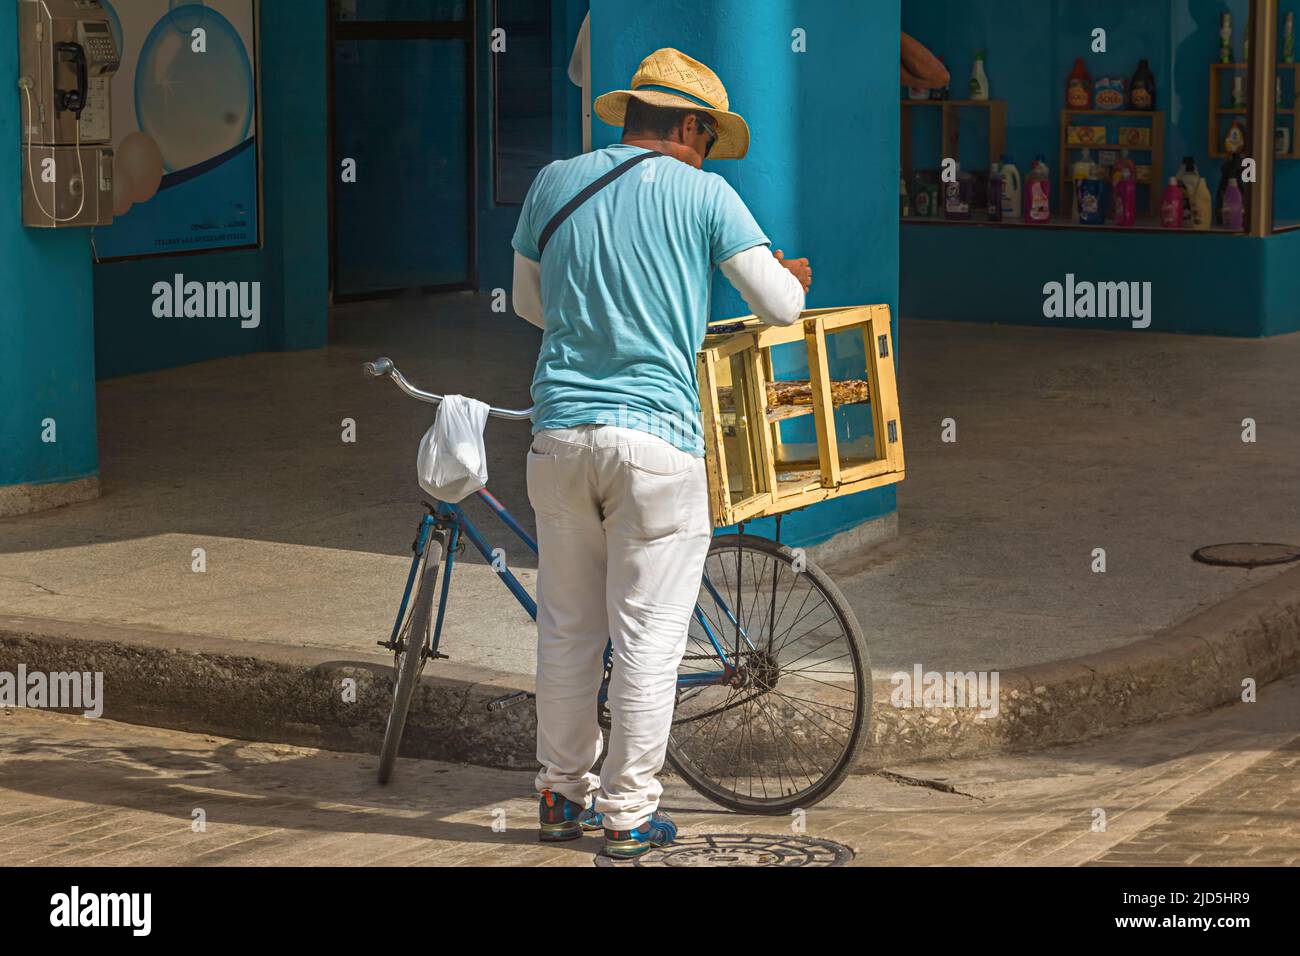 street vendor with a straw hat, white trousers and light blue T-Shirt and a bicycle sells bakery items in the town of Camagüey, Cuba Stock Photo